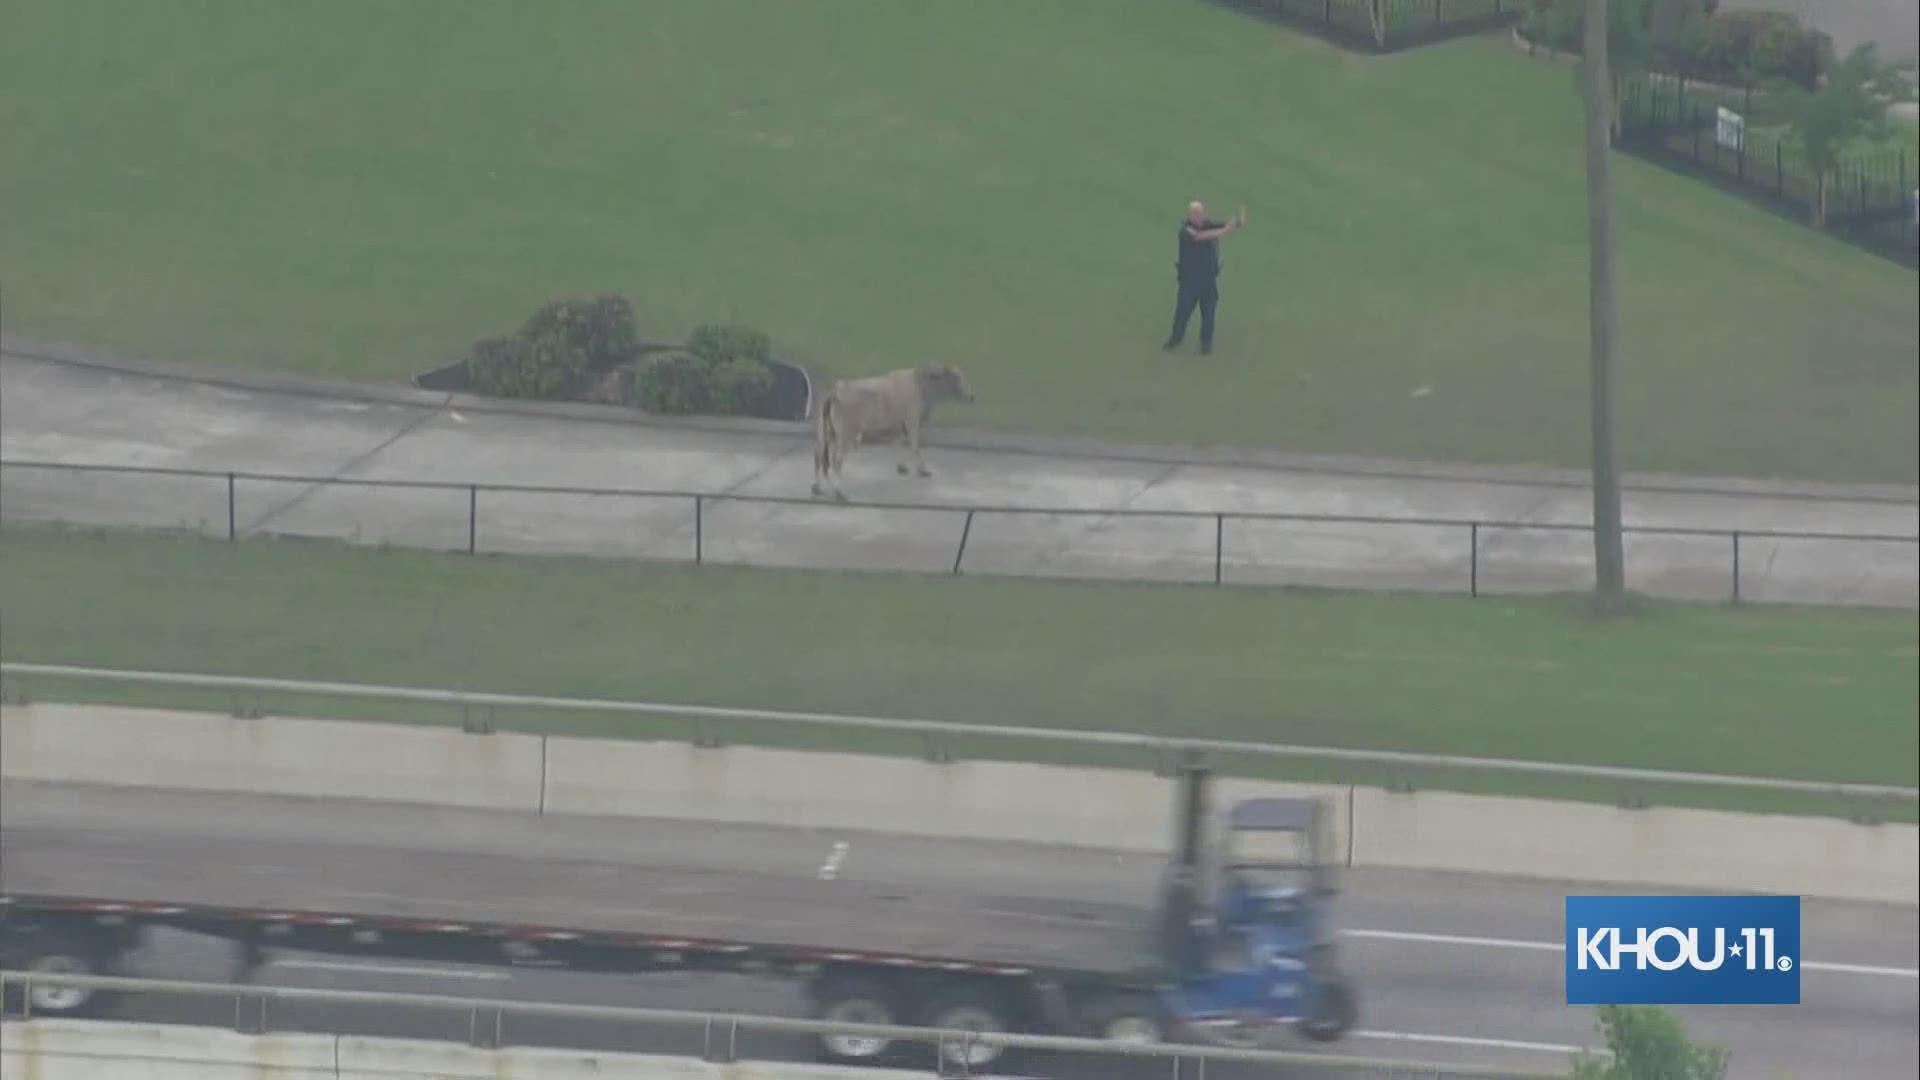 A list of unusual animal sightings, incidents in the Houston area 